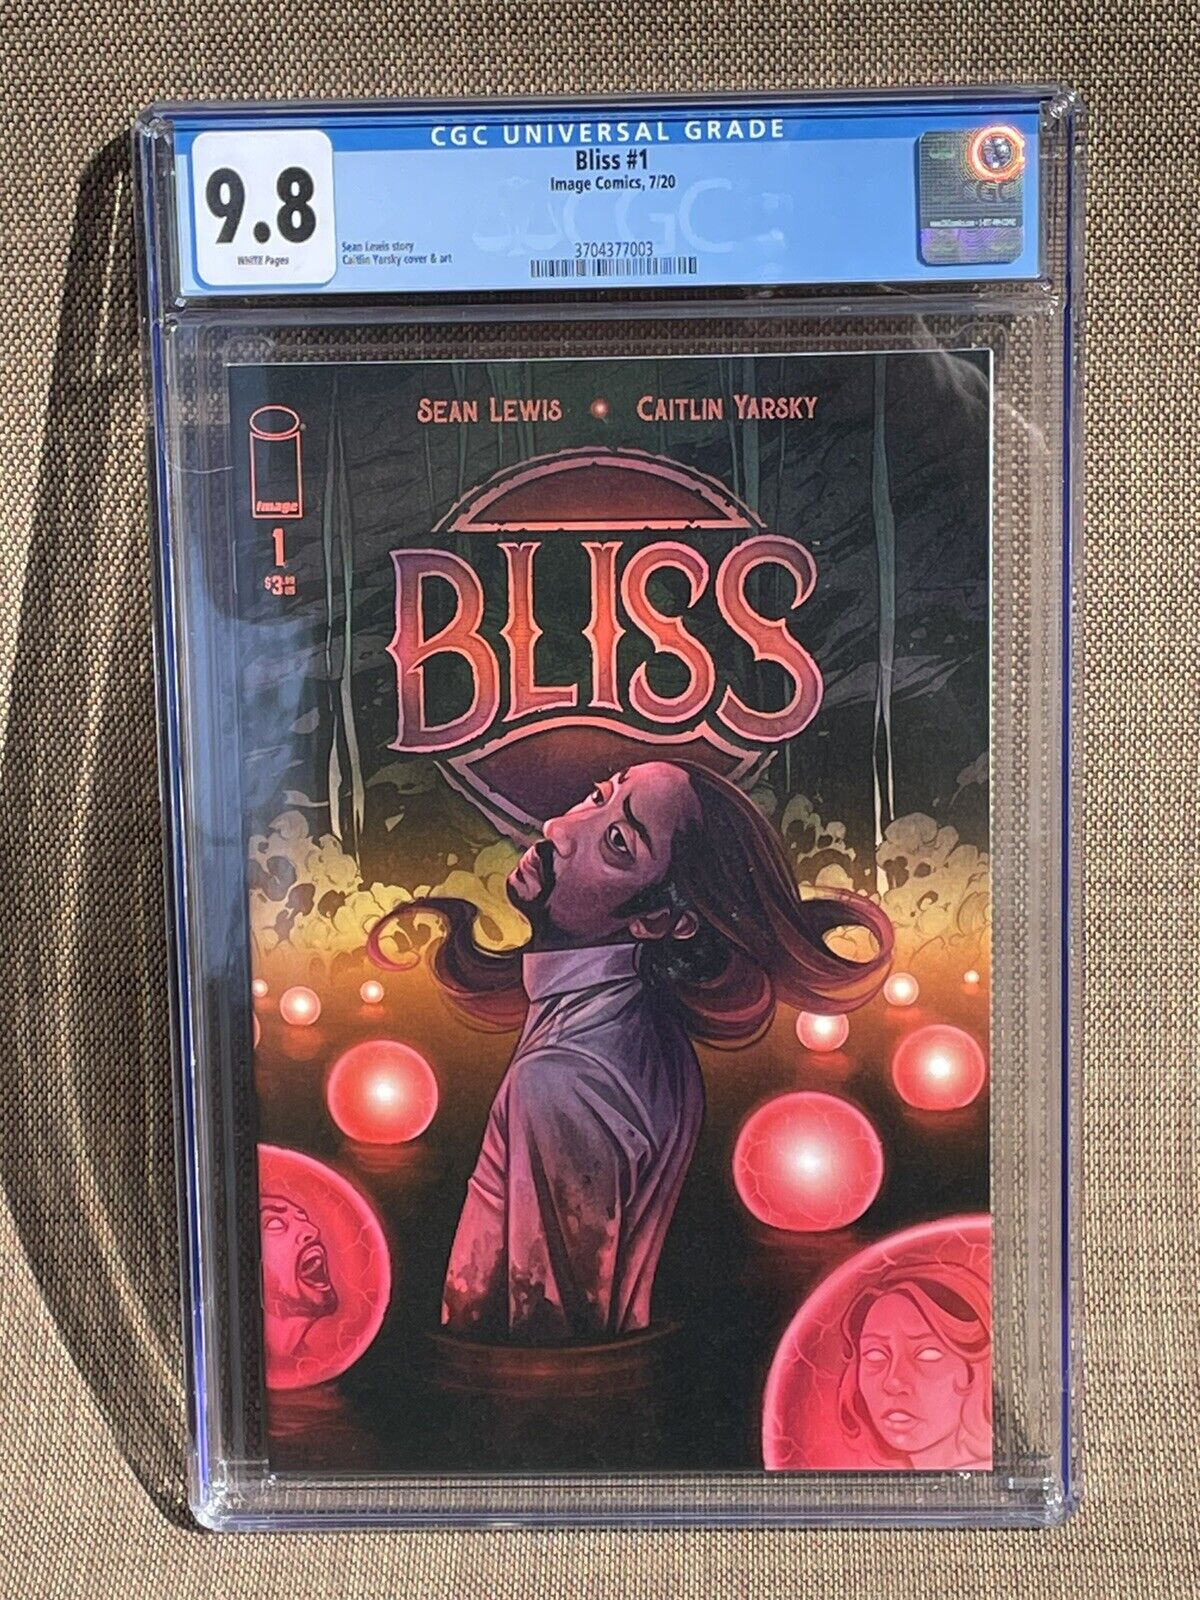 Bliss #1 CGC 9.8 1st First Print Edition Sean Lewis Caitlin Yarksy Image Comics.